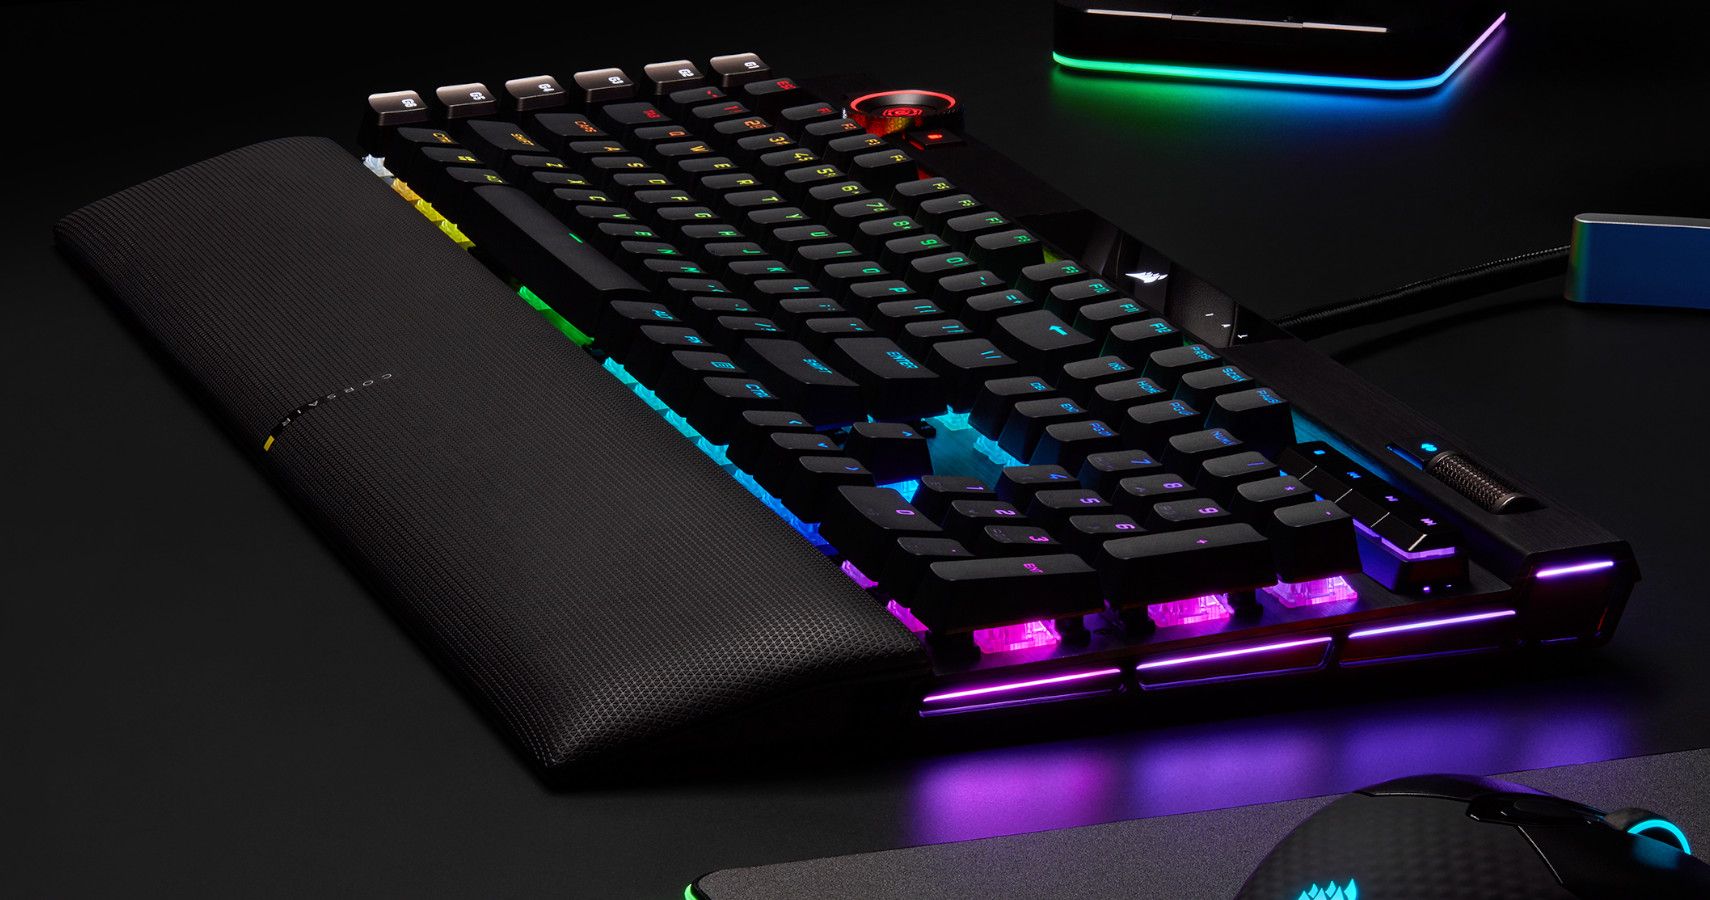 Corsair K100 RGB Keyboard Review: The Brightest, The Fastest, The Best